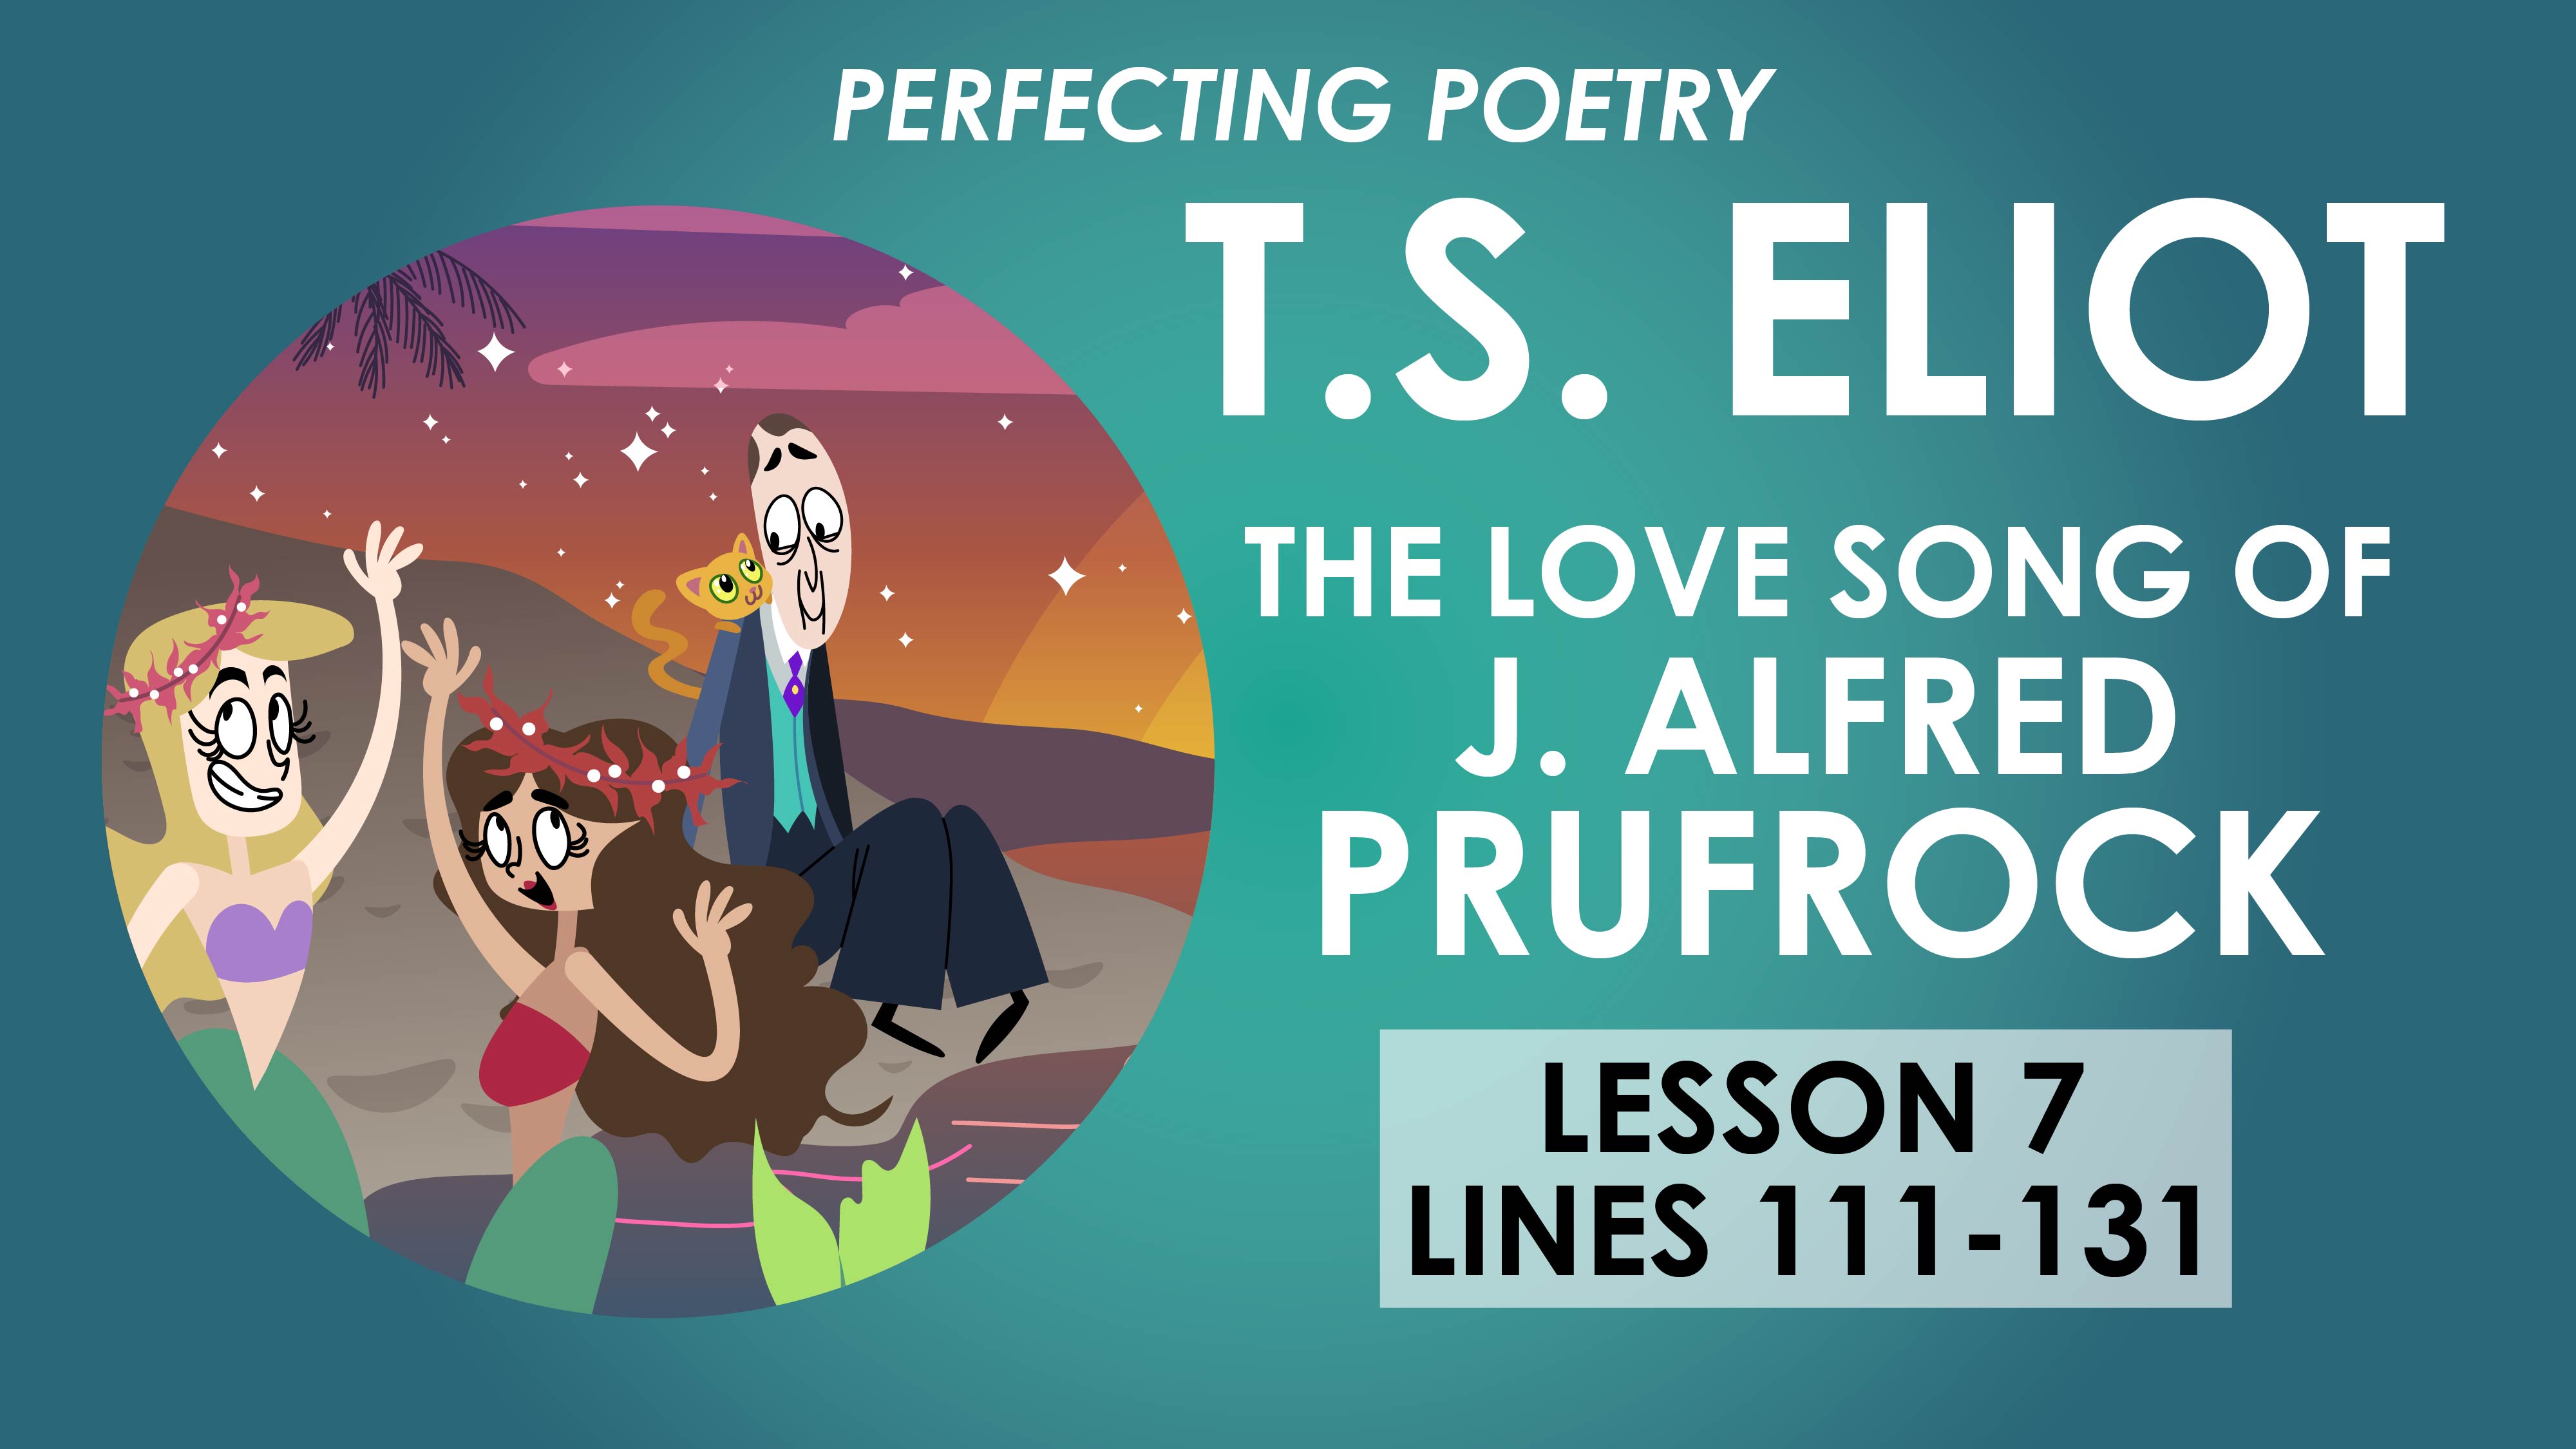 The Love Song of J. Alfred Prufrock - Lesson 7 - T.S. Eliot - Perfecting Poetry